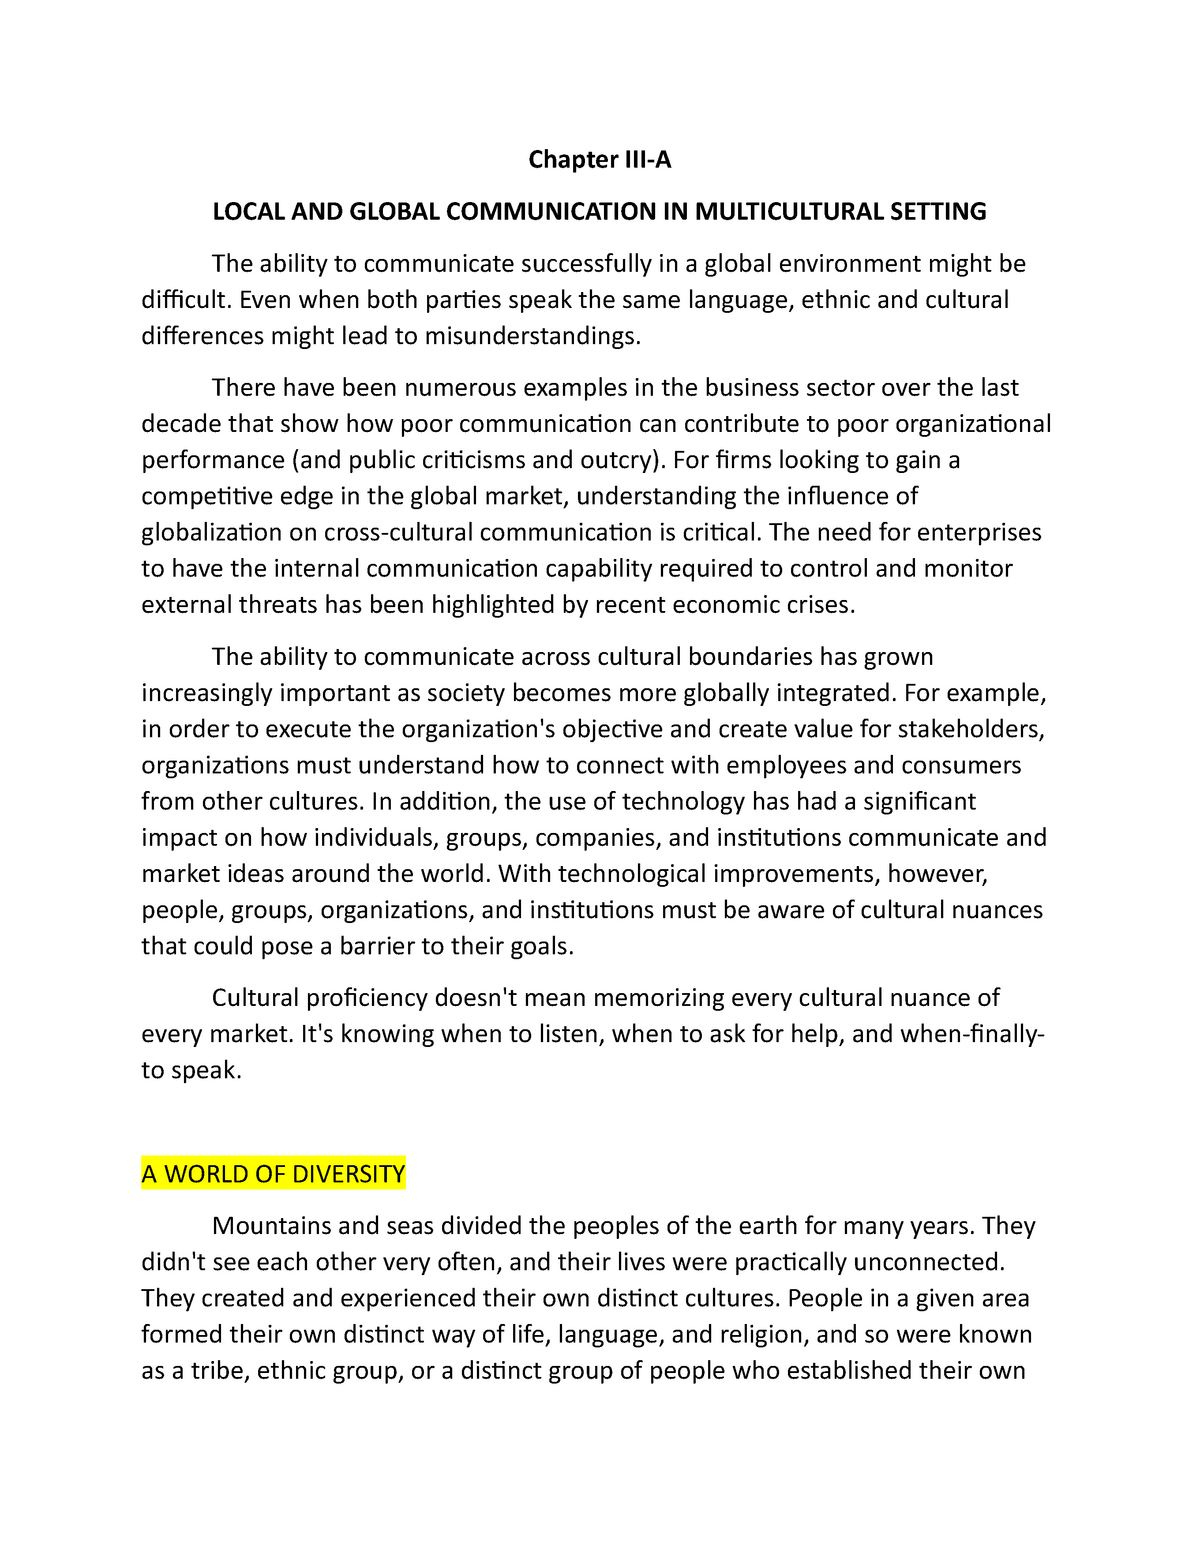 global communication in multicultural setting essay